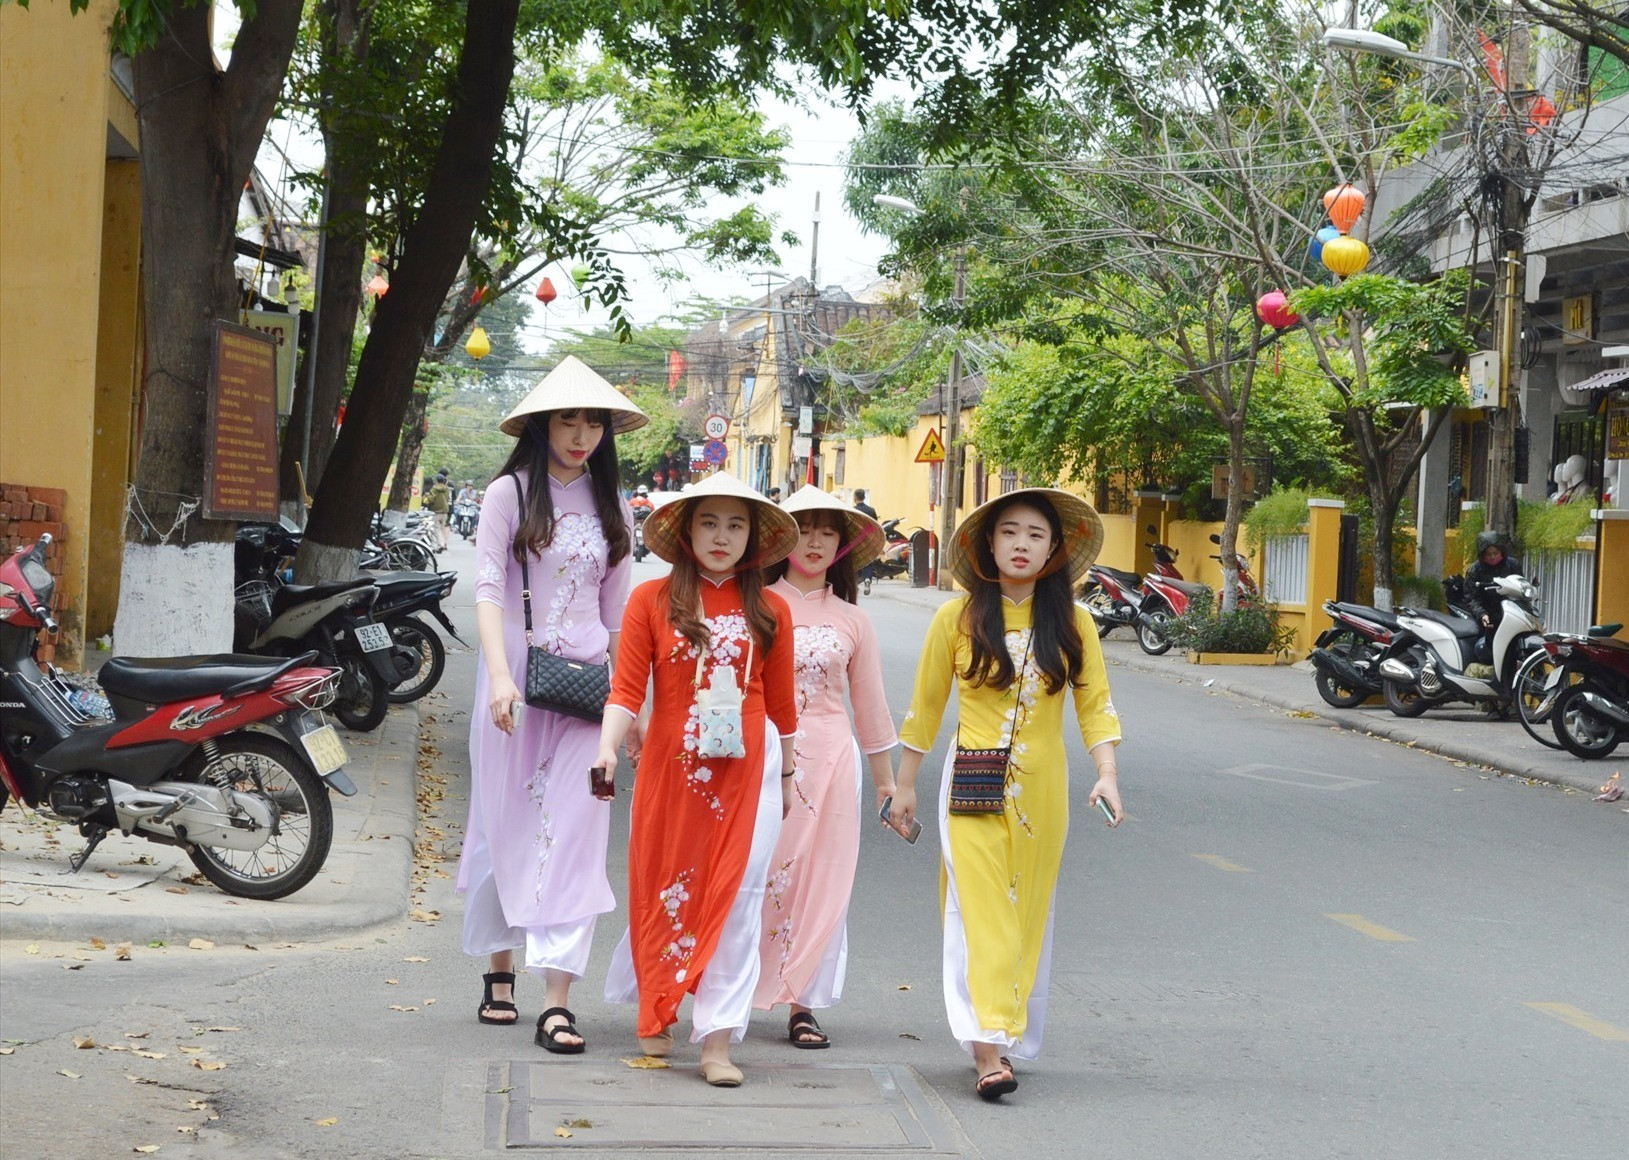 Foreign tourists in Hoi An city, Quang Nam province